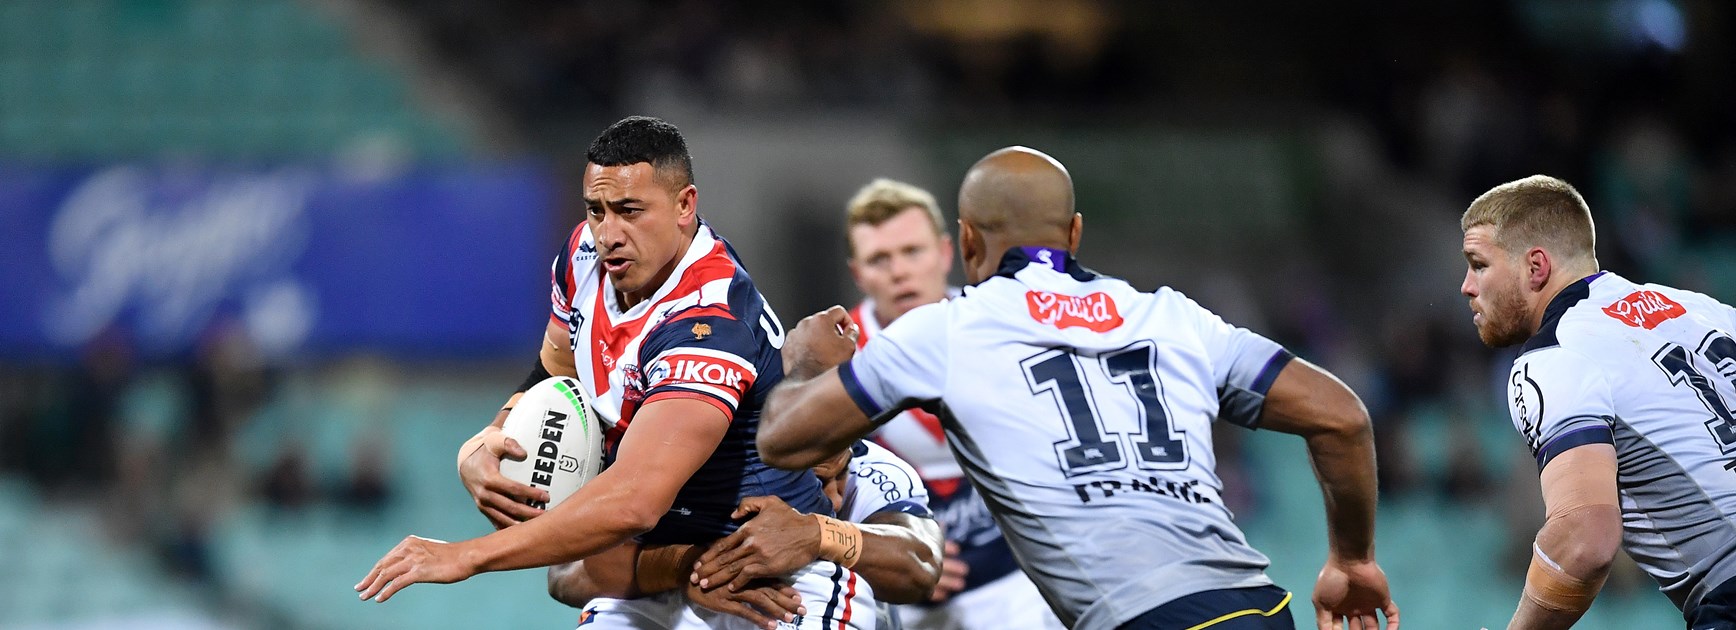 Roosters Rue Chances in Contest With Storm